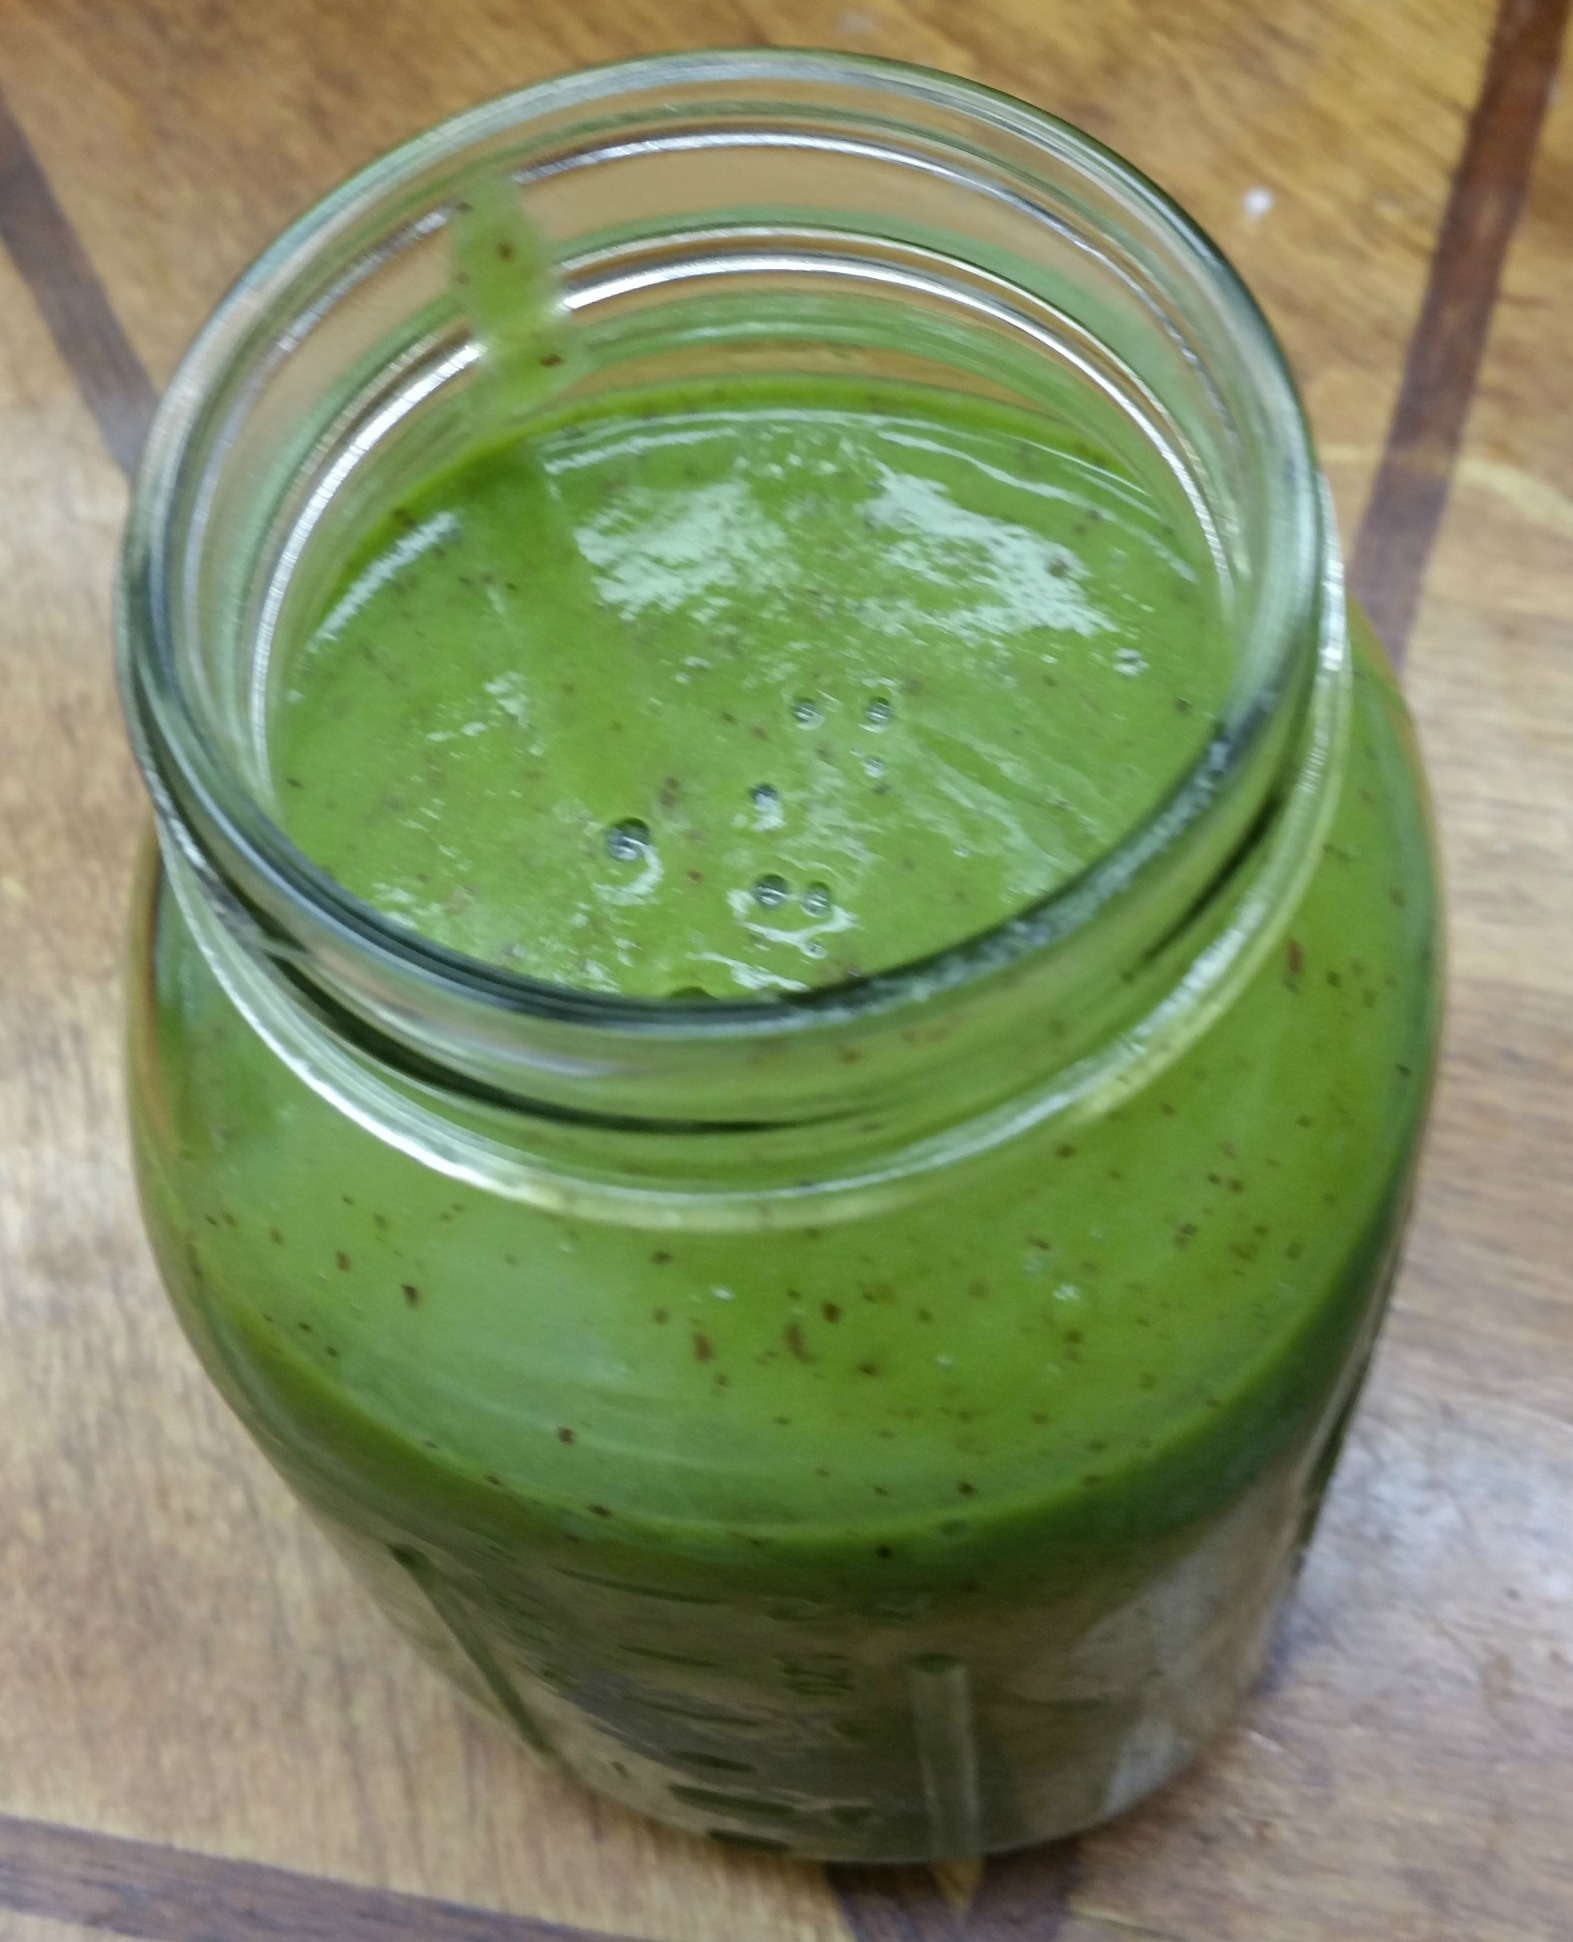 Delicious grape smoothie recipe - green smoothie with spinach